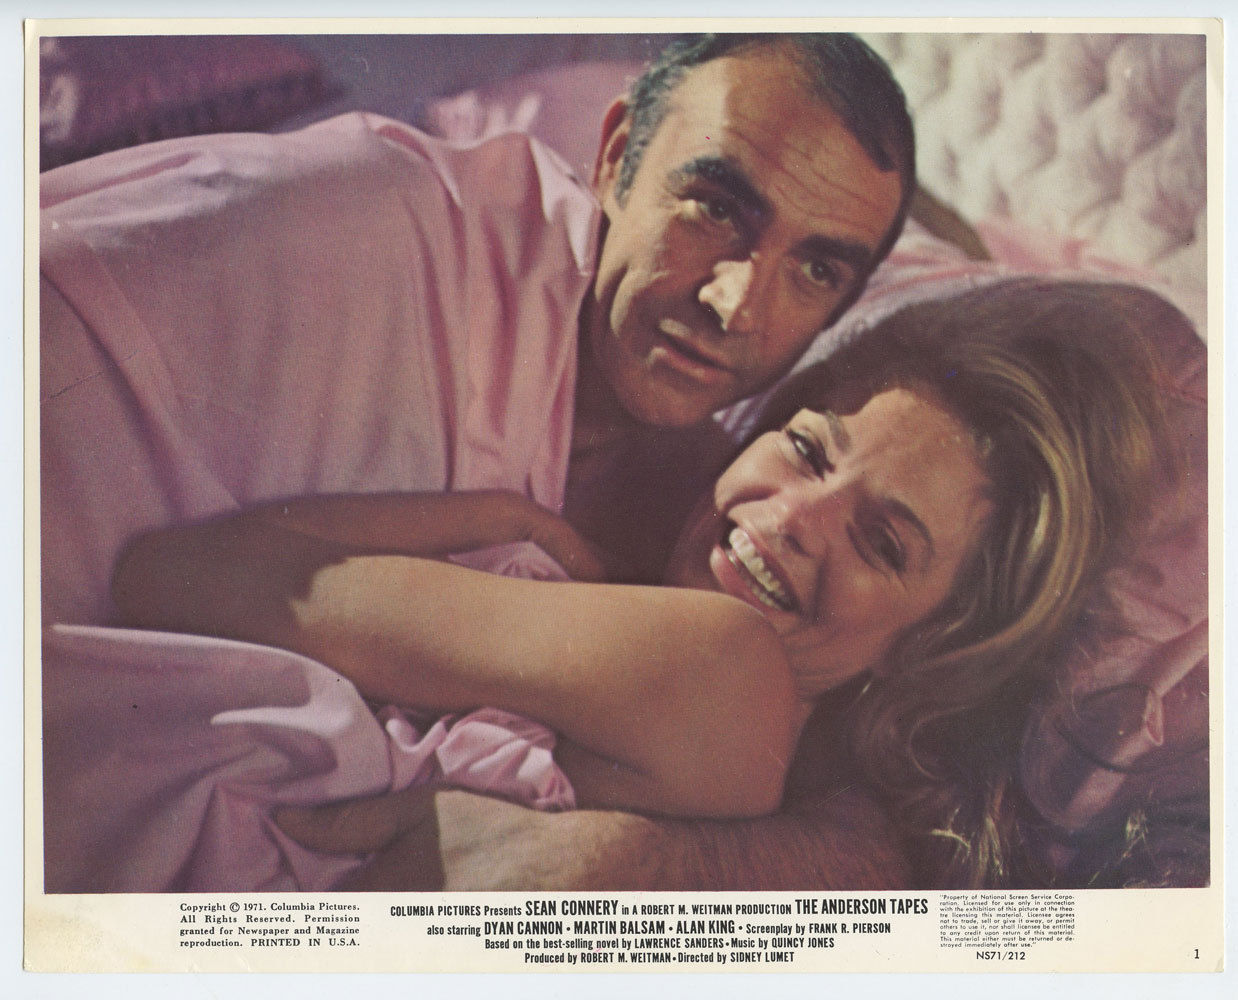 Sean Connery Dyan Cannon Photo 1971 The Anderson Tapes Original Vintage